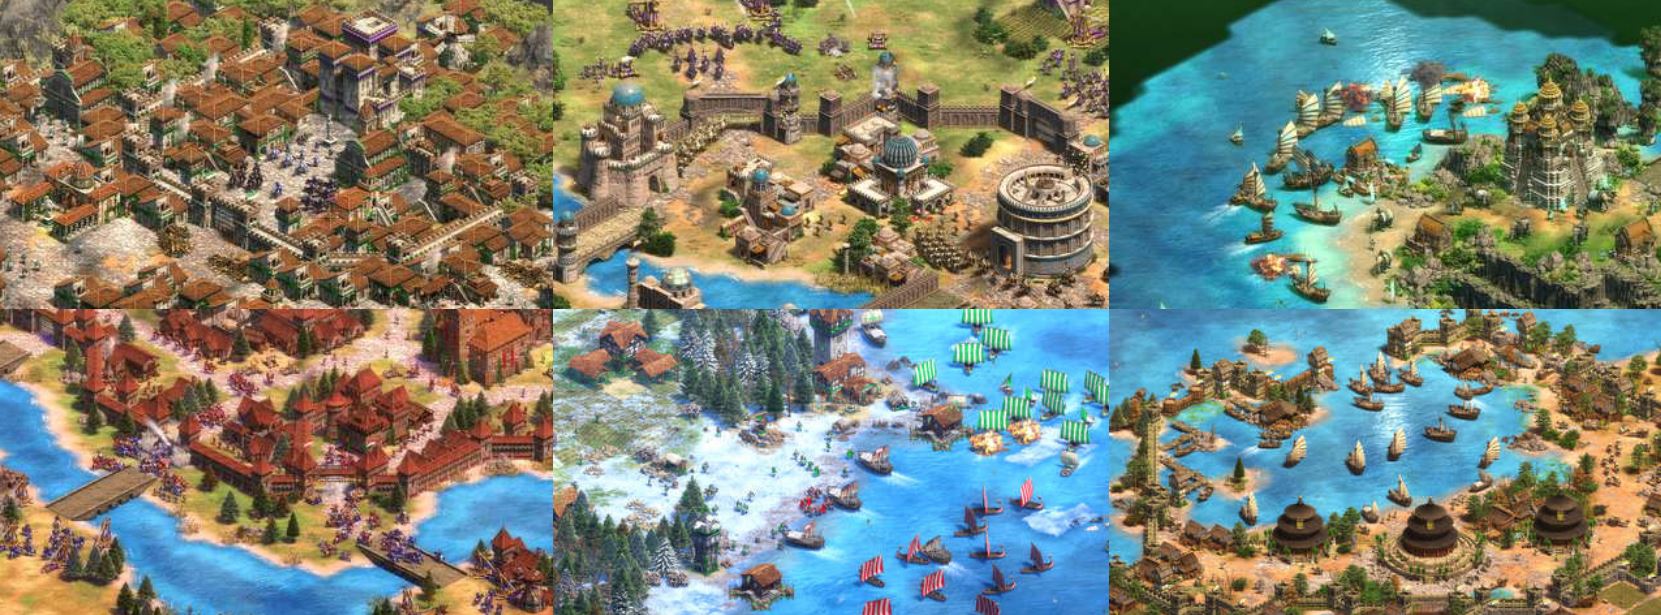 Age Of Empires 2 Definitive Edition Enhanced Graphics Pack Comparison